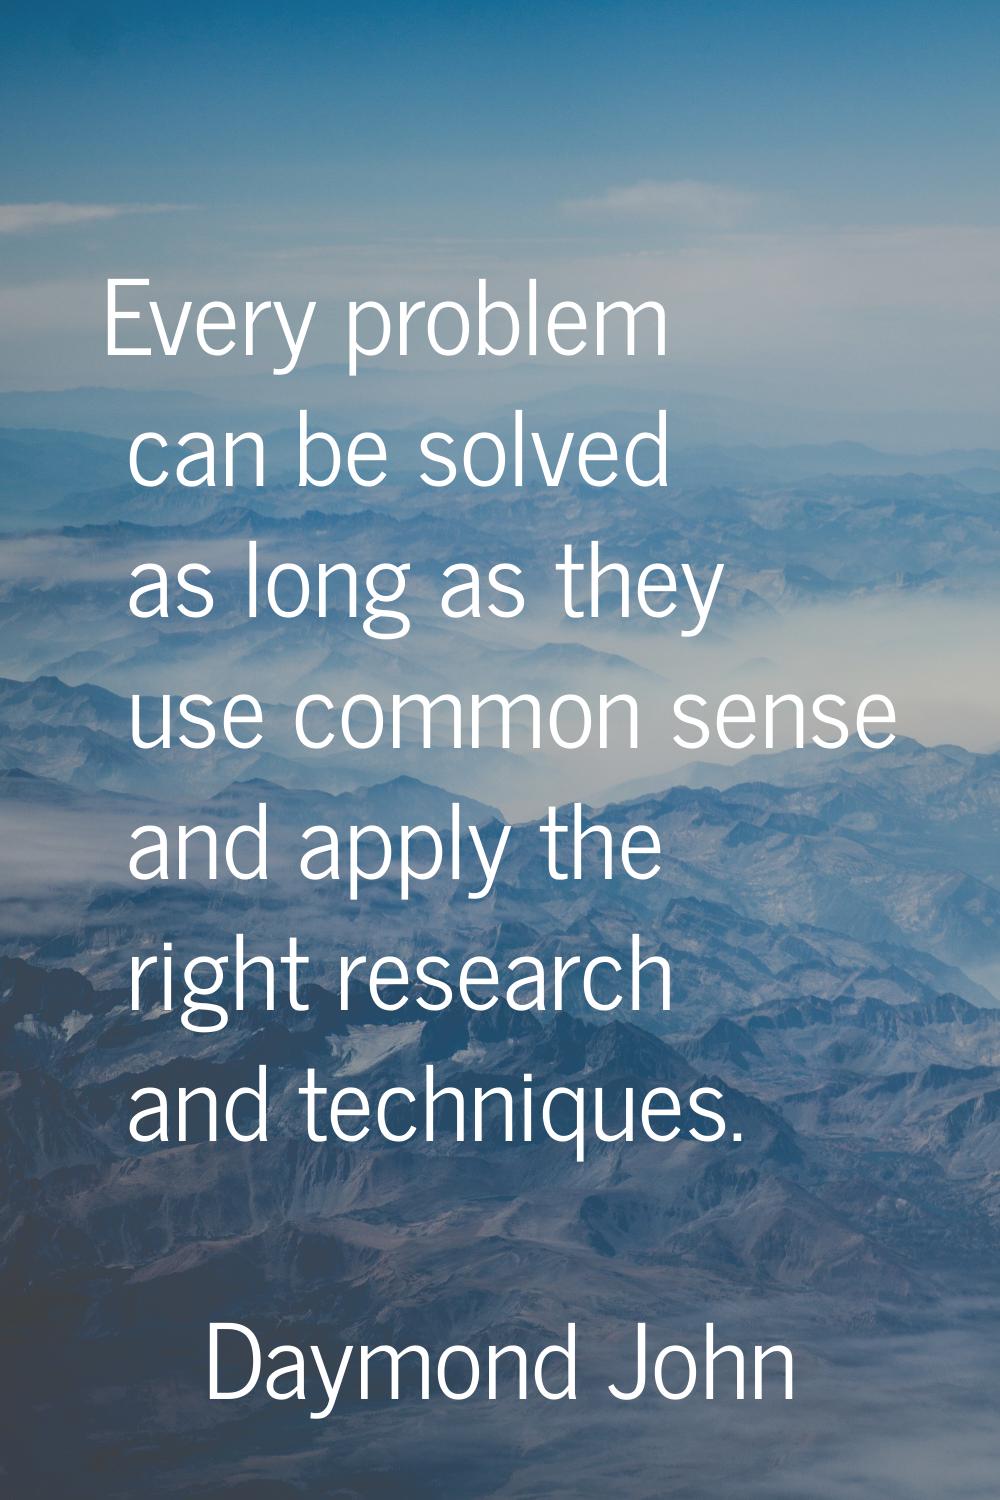 Every problem can be solved as long as they use common sense and apply the right research and techn